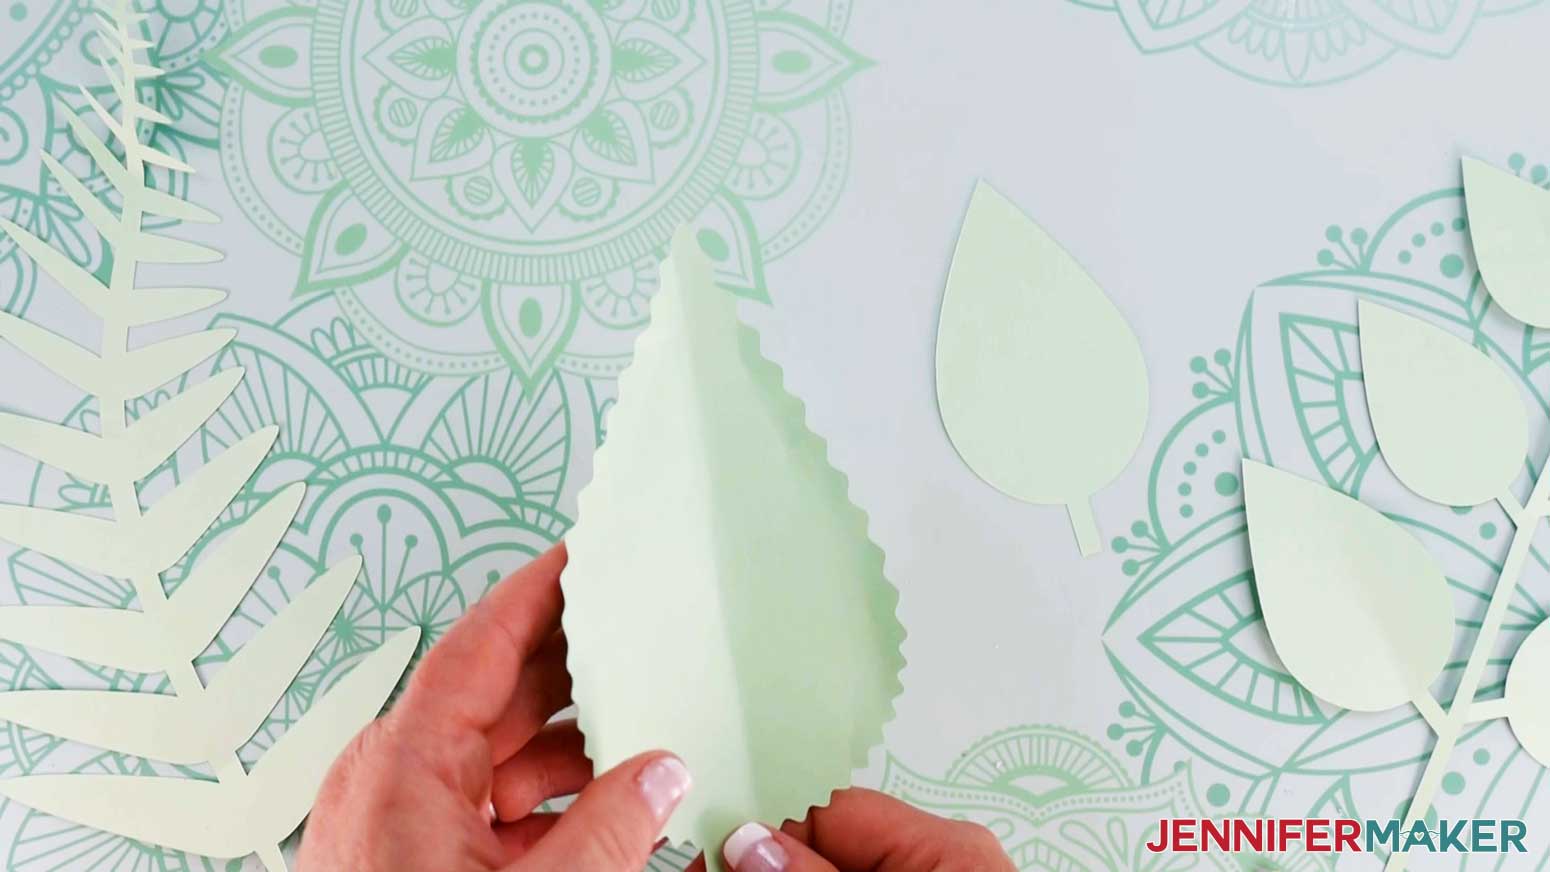 Crease the paper flower backdrop greenery to create depth.